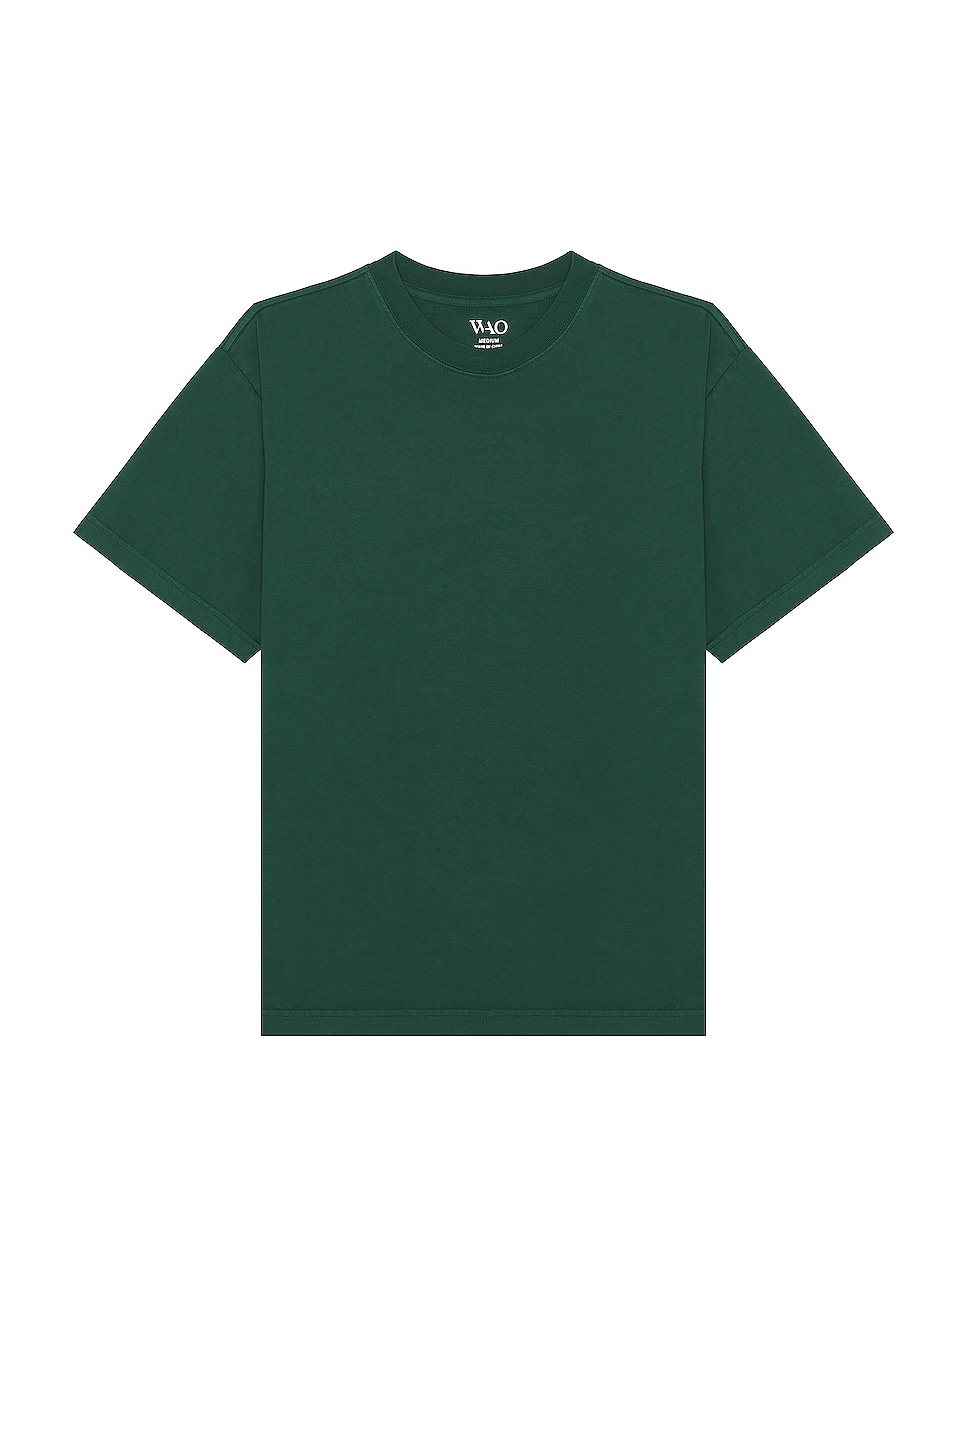 Image 1 of WAO The Relaxed Tee in green